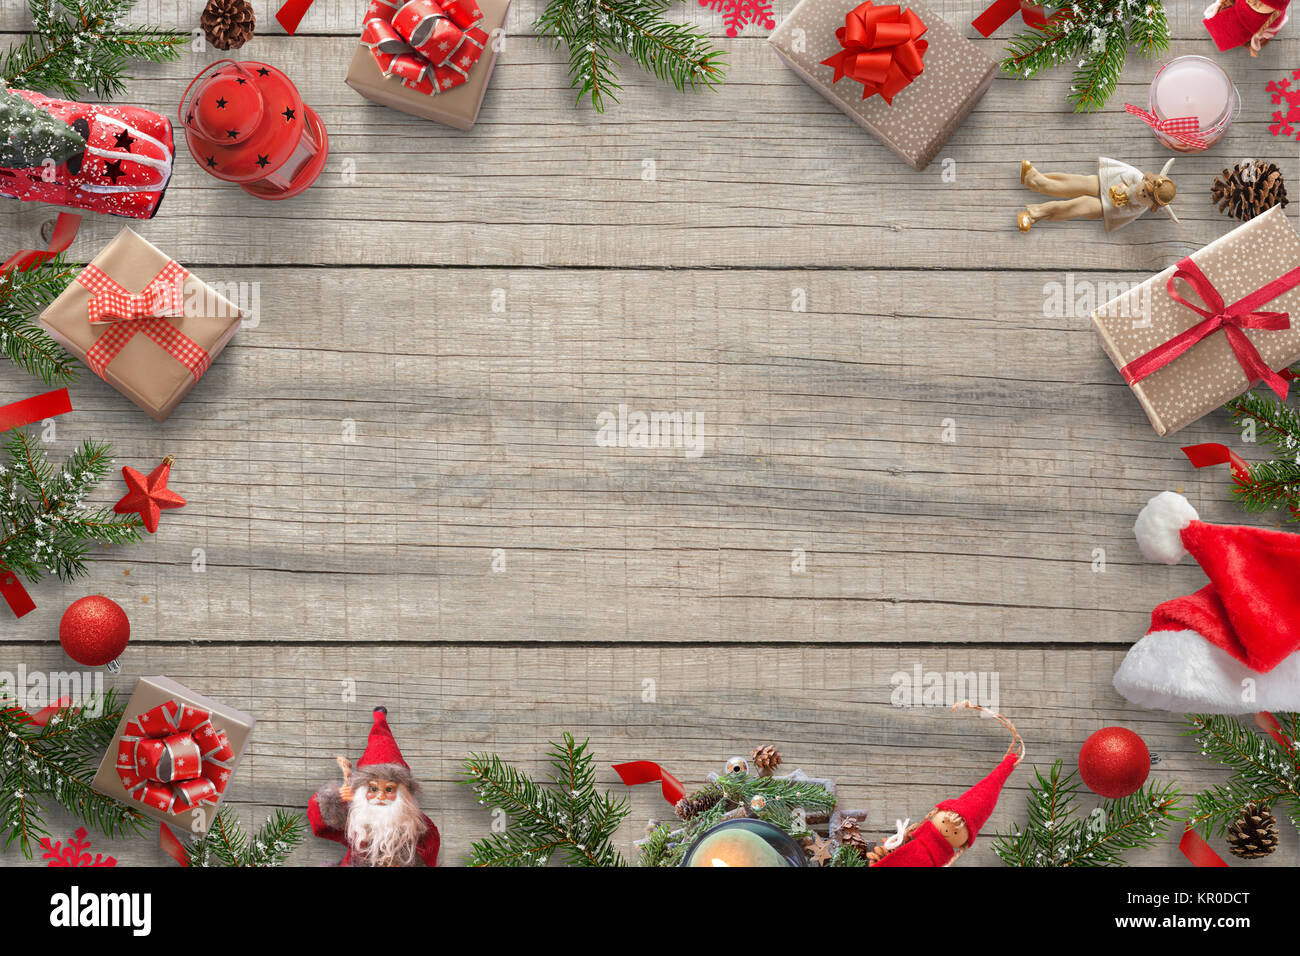 Christmas decorations background image with free space for greeting text.  Christmas tree, gifts, car, lantern; pinecones; Santa hat, doll and  Christma Stock Photo - Alamy